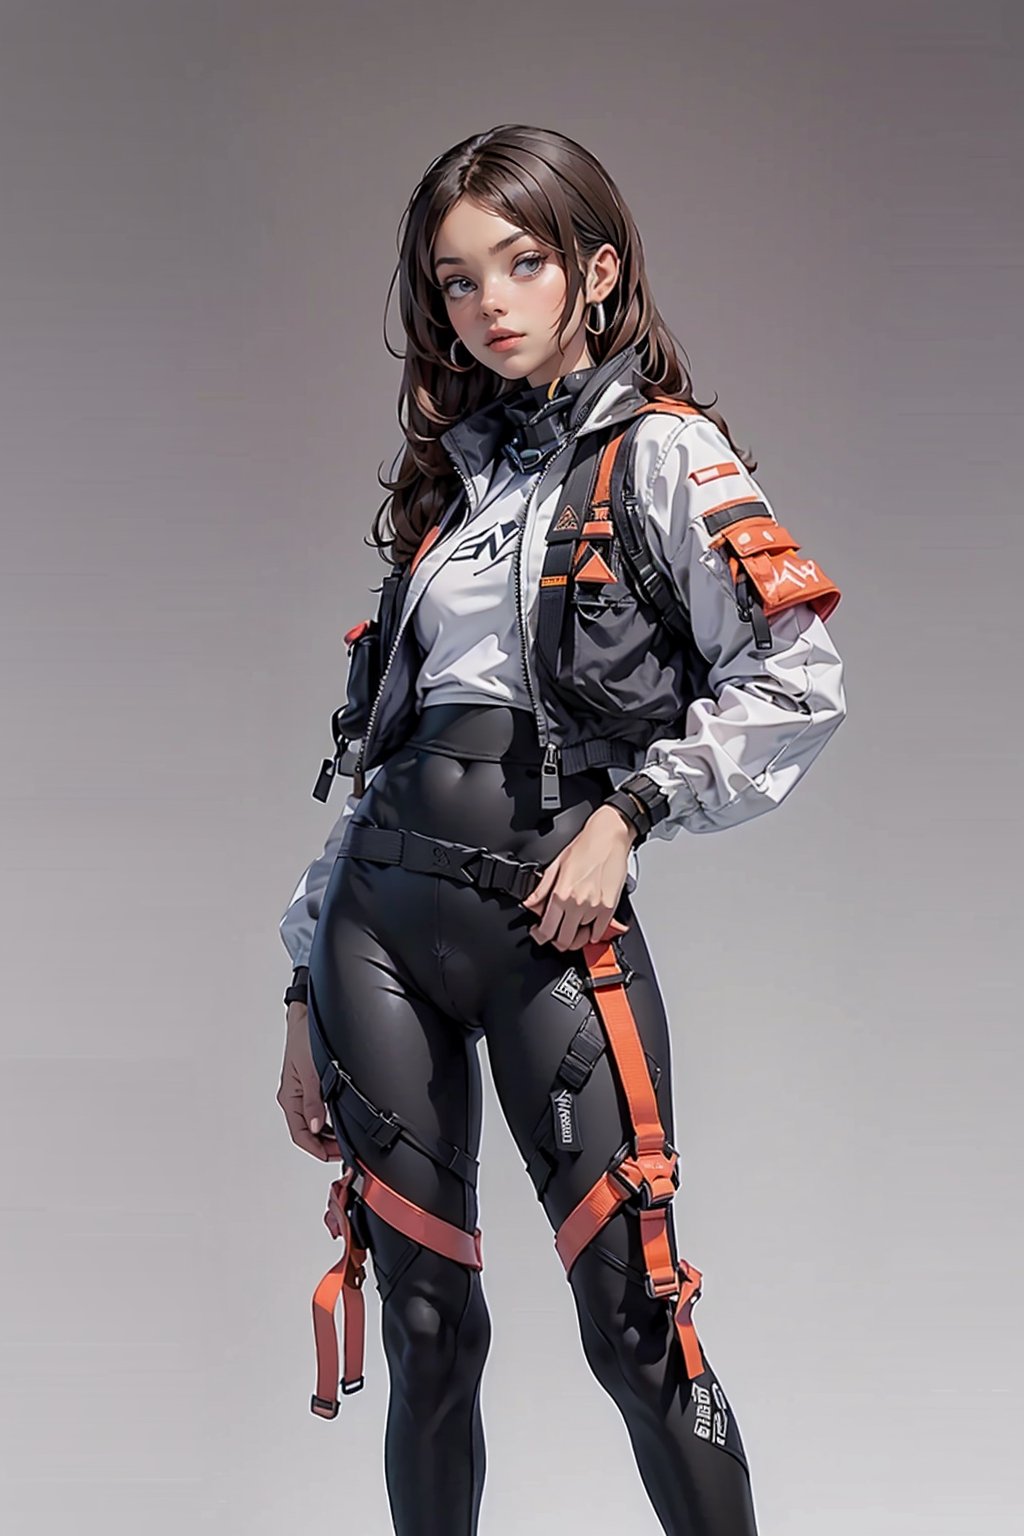 1 girl, solo girl, Lady, full body, brown braided hair, Girl wearing white tech bodysuit, gray sports leggings, tech harnesses, cargo, straps, tech wear, military jacket red pilot, front image, symmetrical image, plain background, no background, gradient background, camel_toe, no background, round ass, front image, symmetrical image